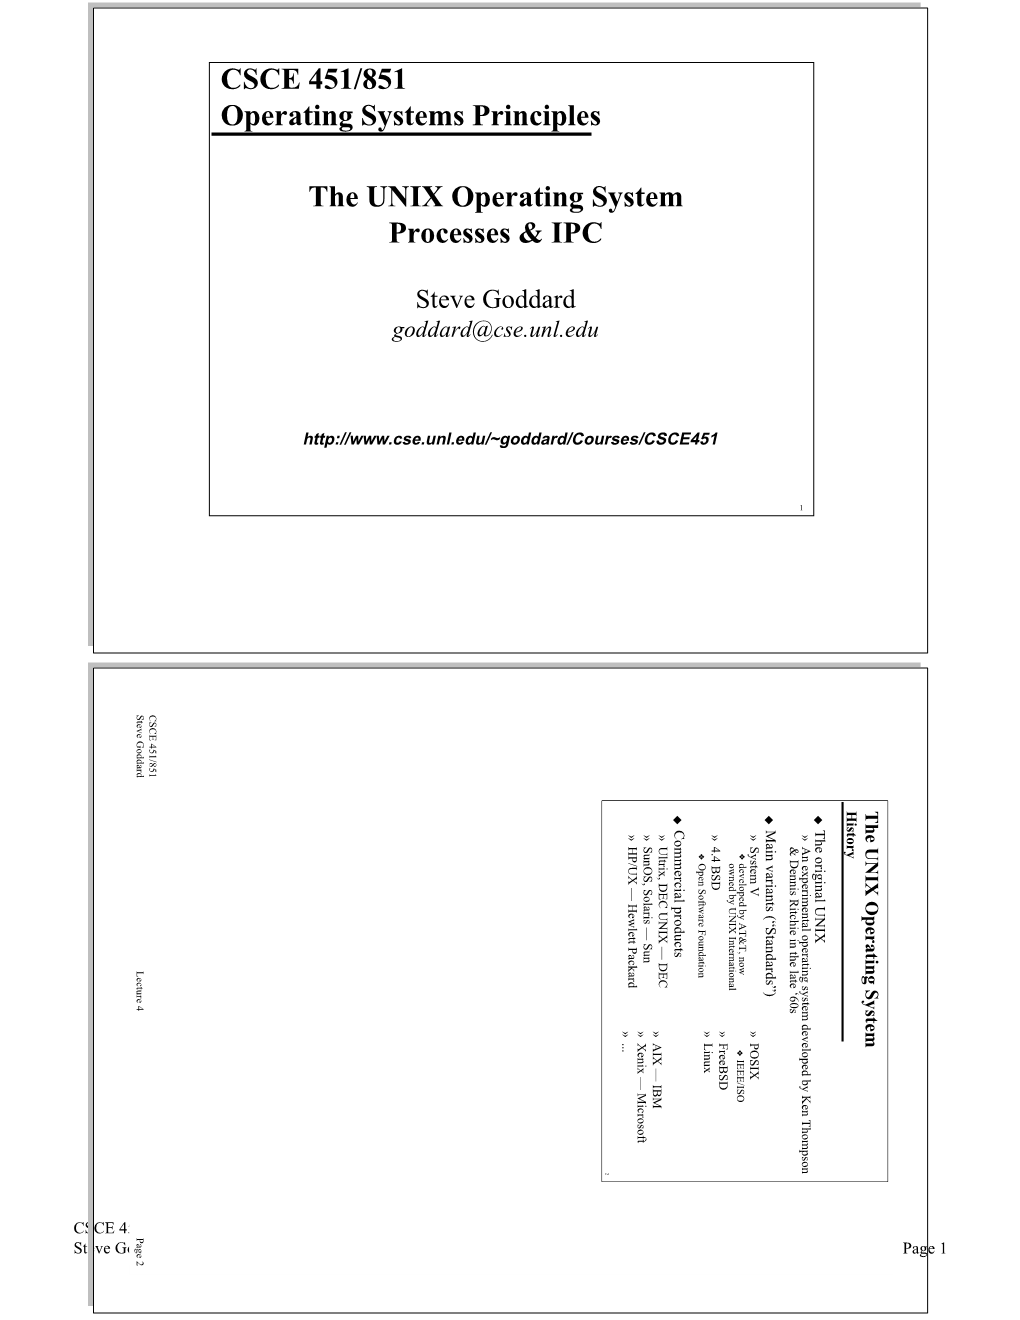 CSCE 451/851 Operating Systems Principles the UNIX Operating System Processes &